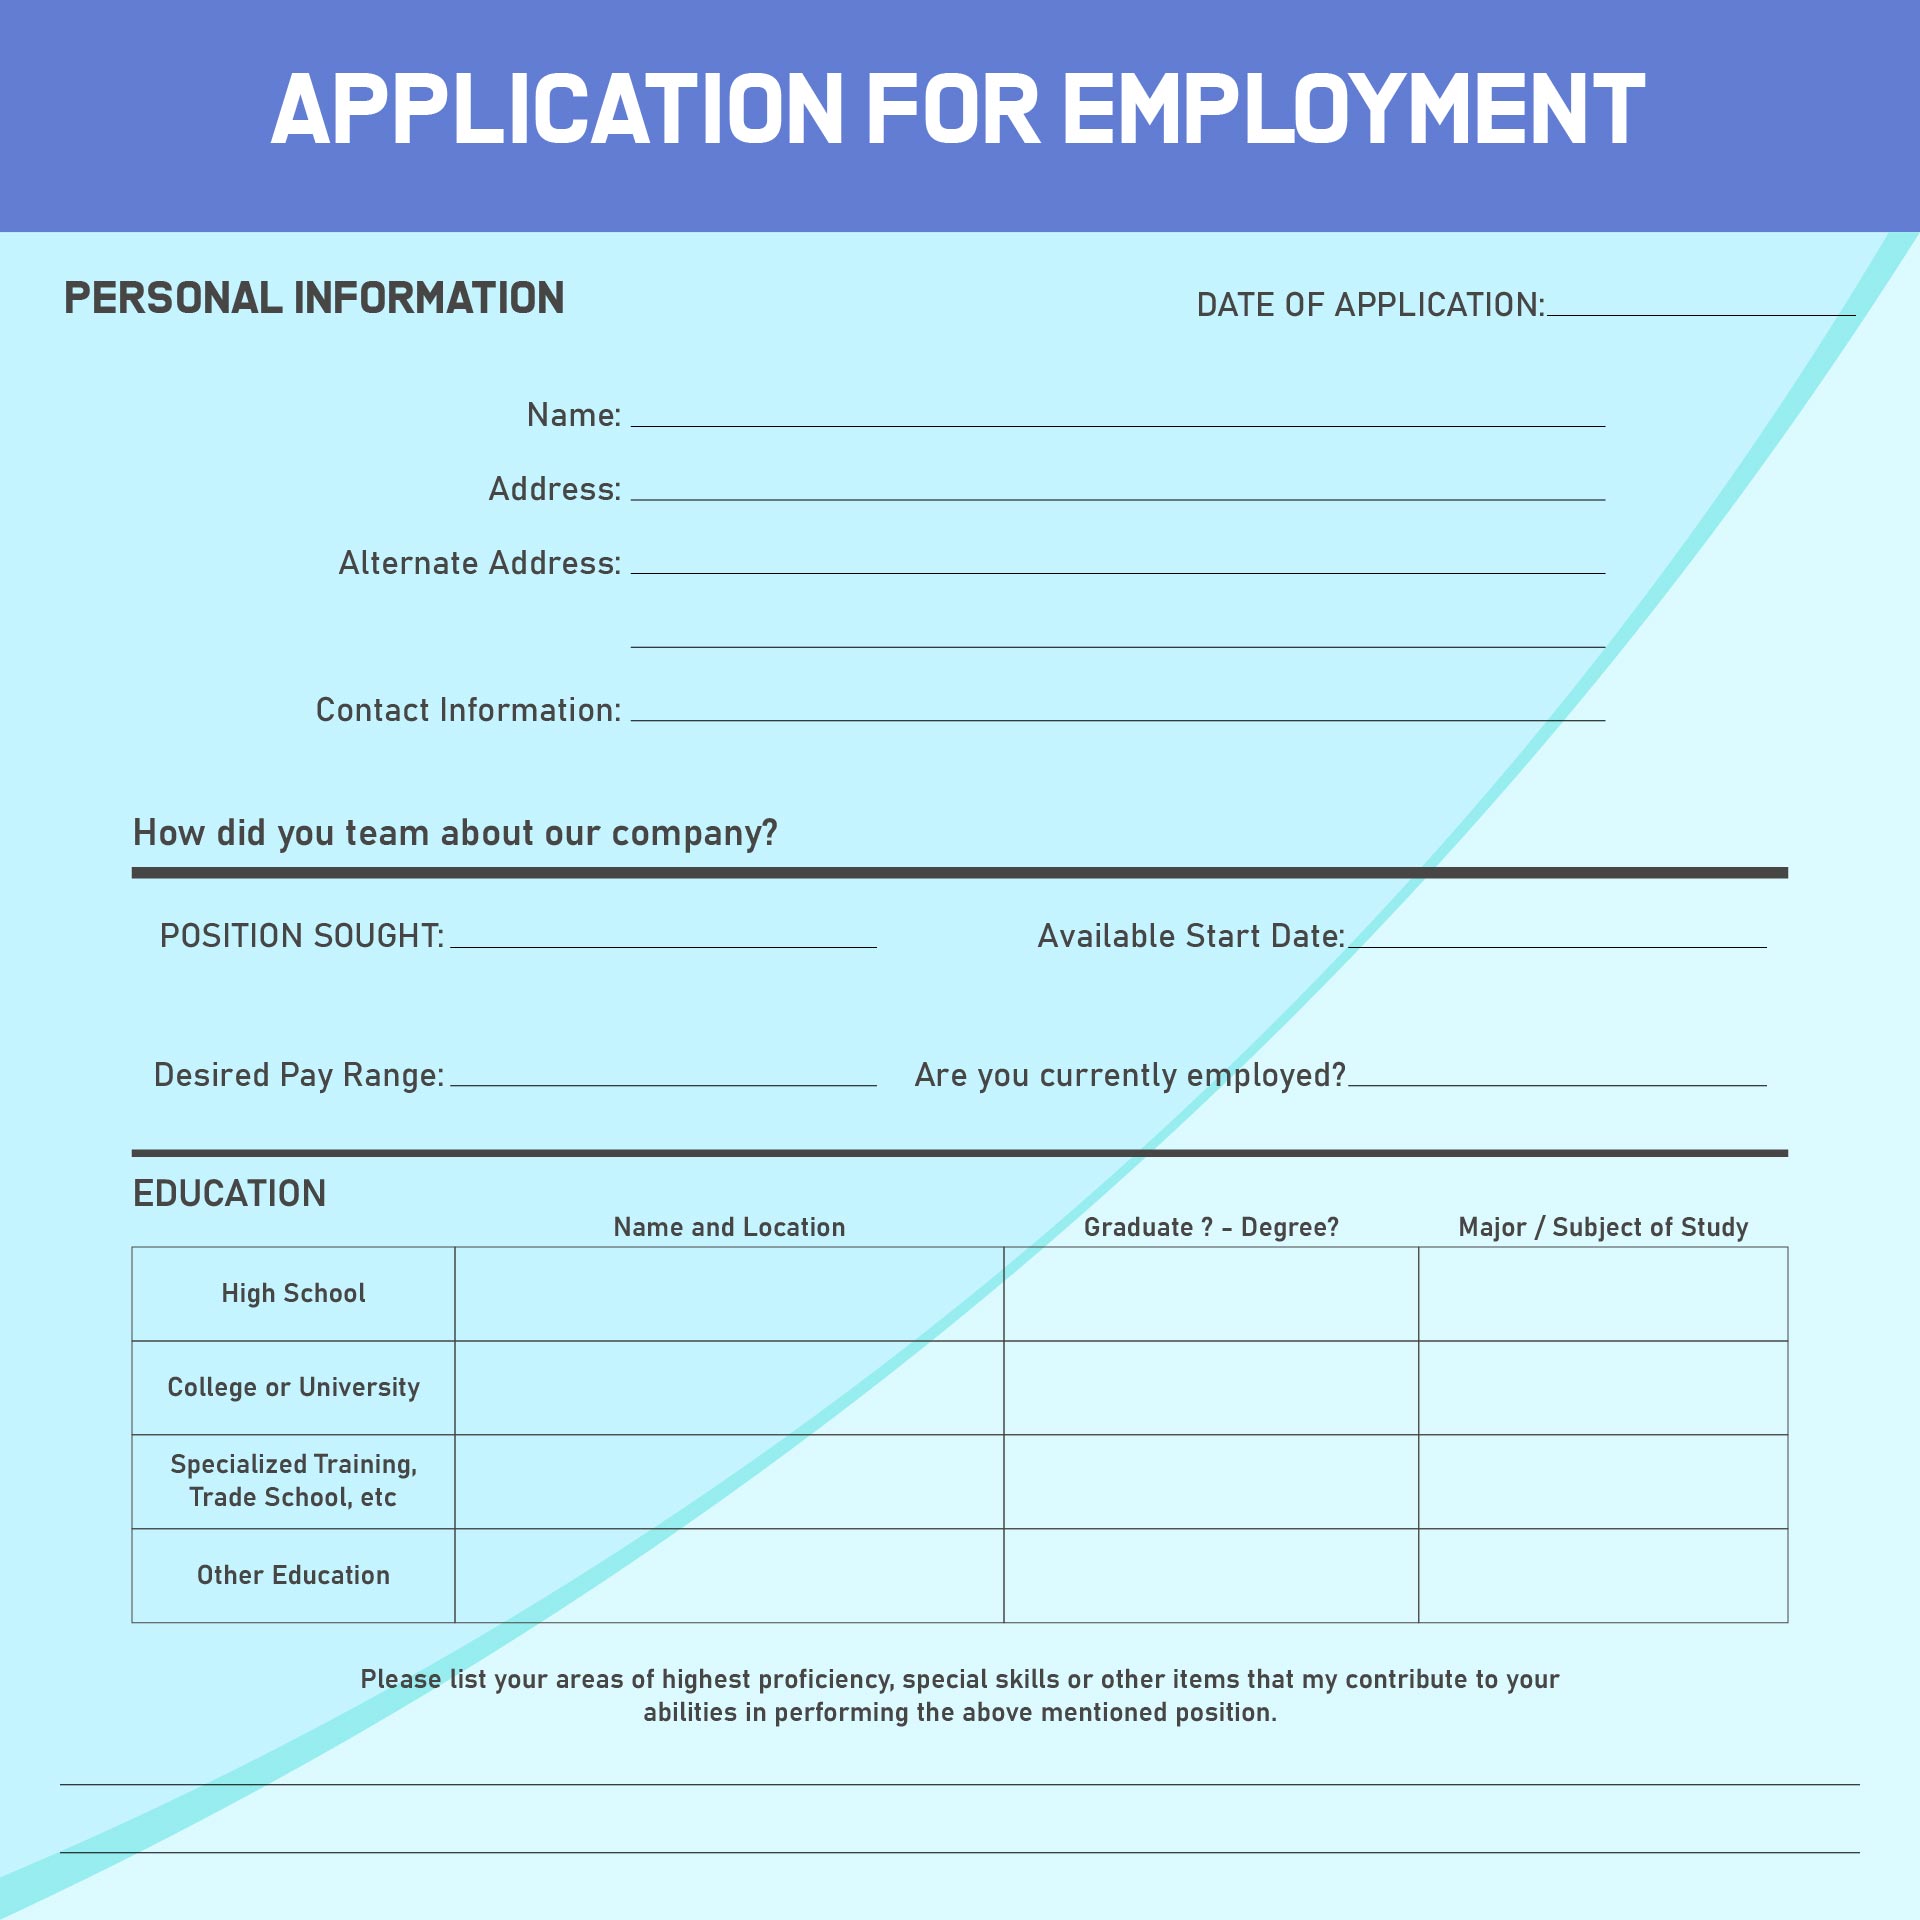 employment-application-form-printable-printable-forms-free-online